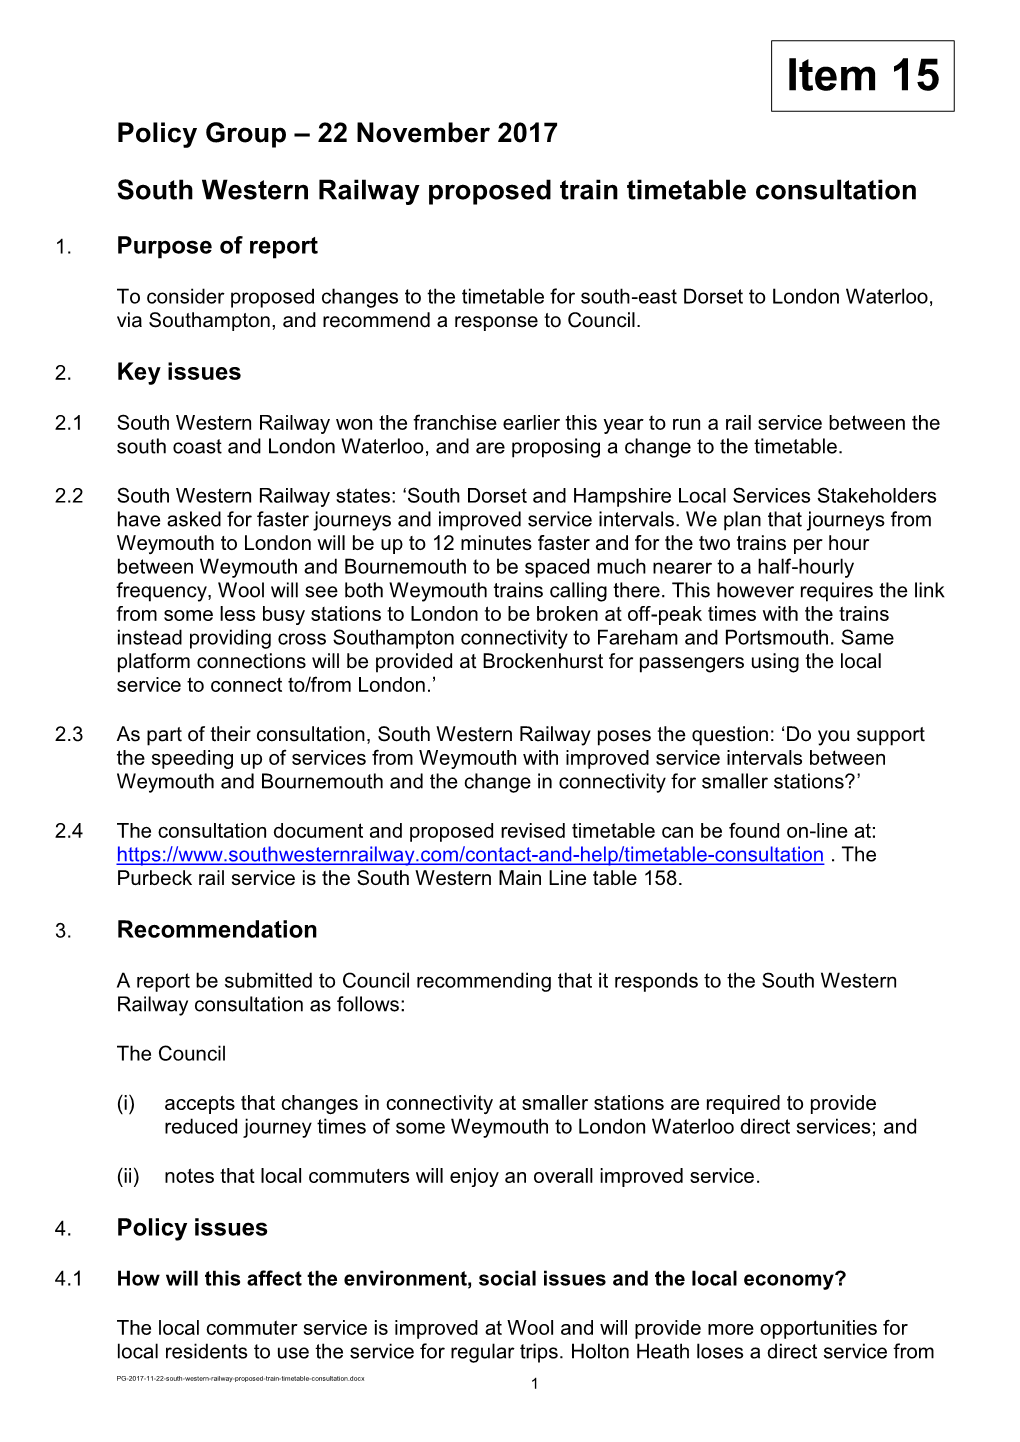 South Western Railway Proposed Train Timetable Consultation